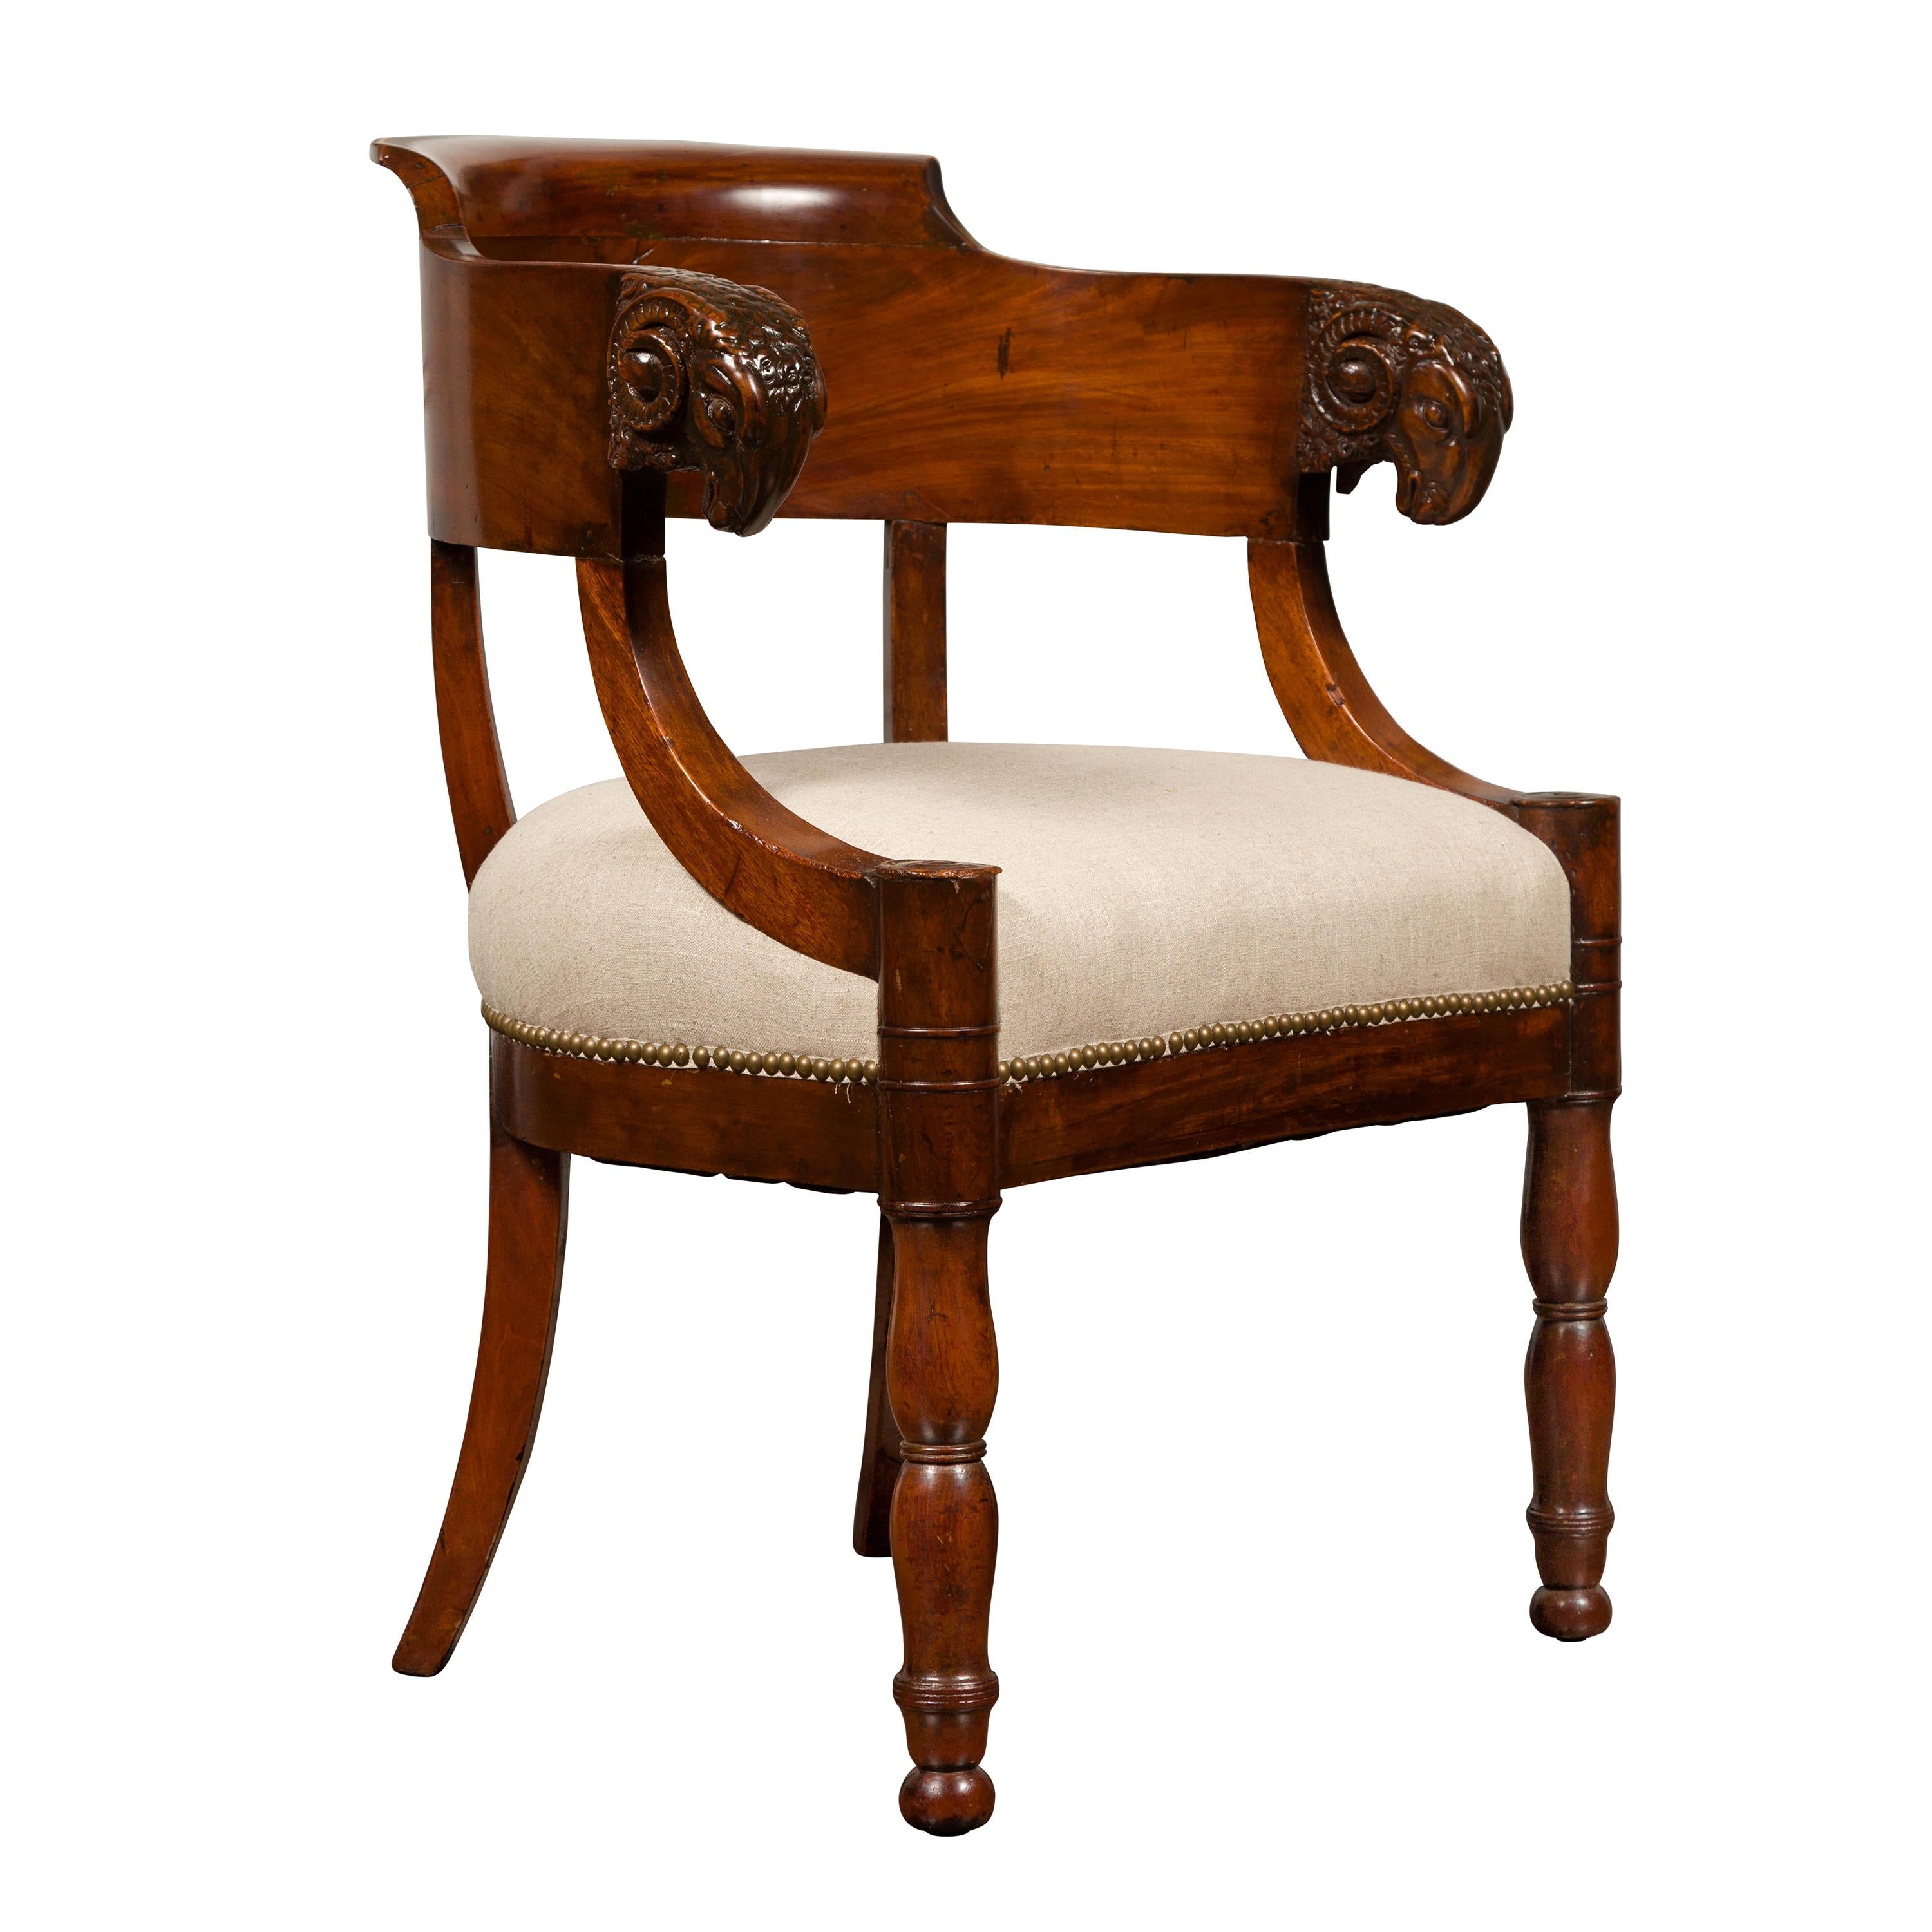 French 1830s Restauration Period Mahogany Armchair with Carved Rams' Heads For Sale